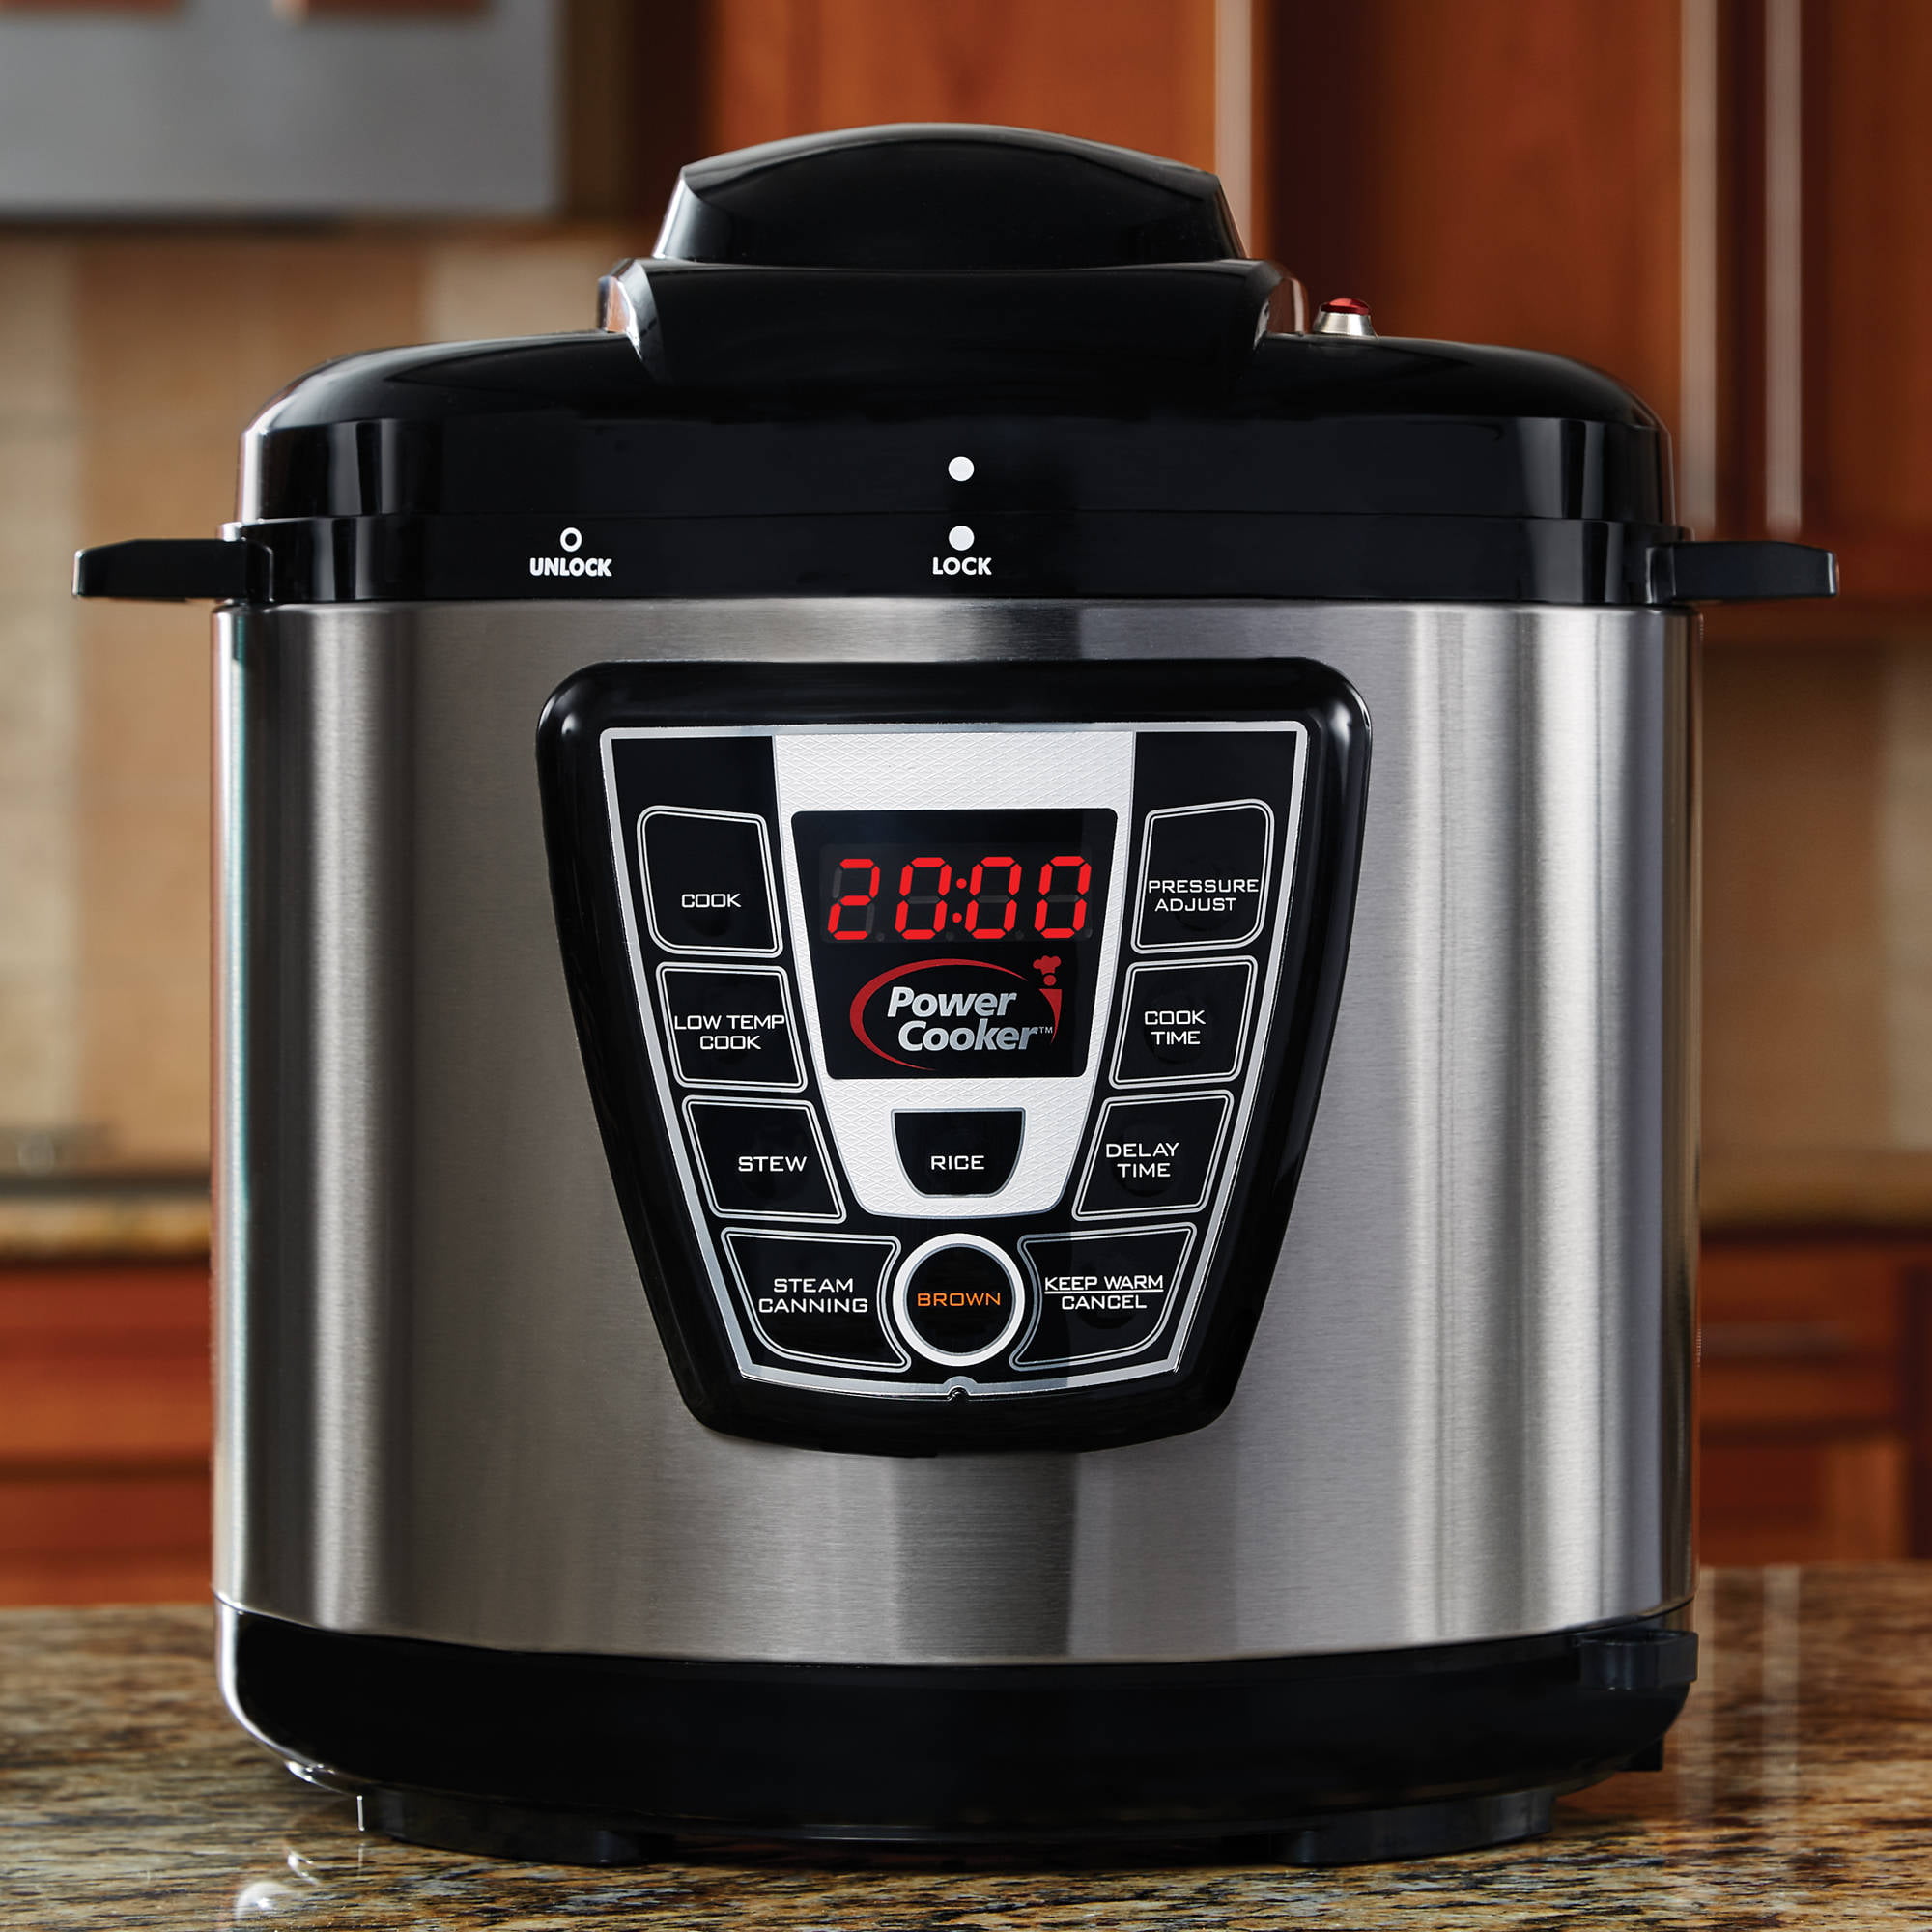 Outlet Express - New! Power XL 8 QT Pressure Cooker in the color Cinnamon -  can also slow cook, warm, brown, steam & it also does canning! ❤️